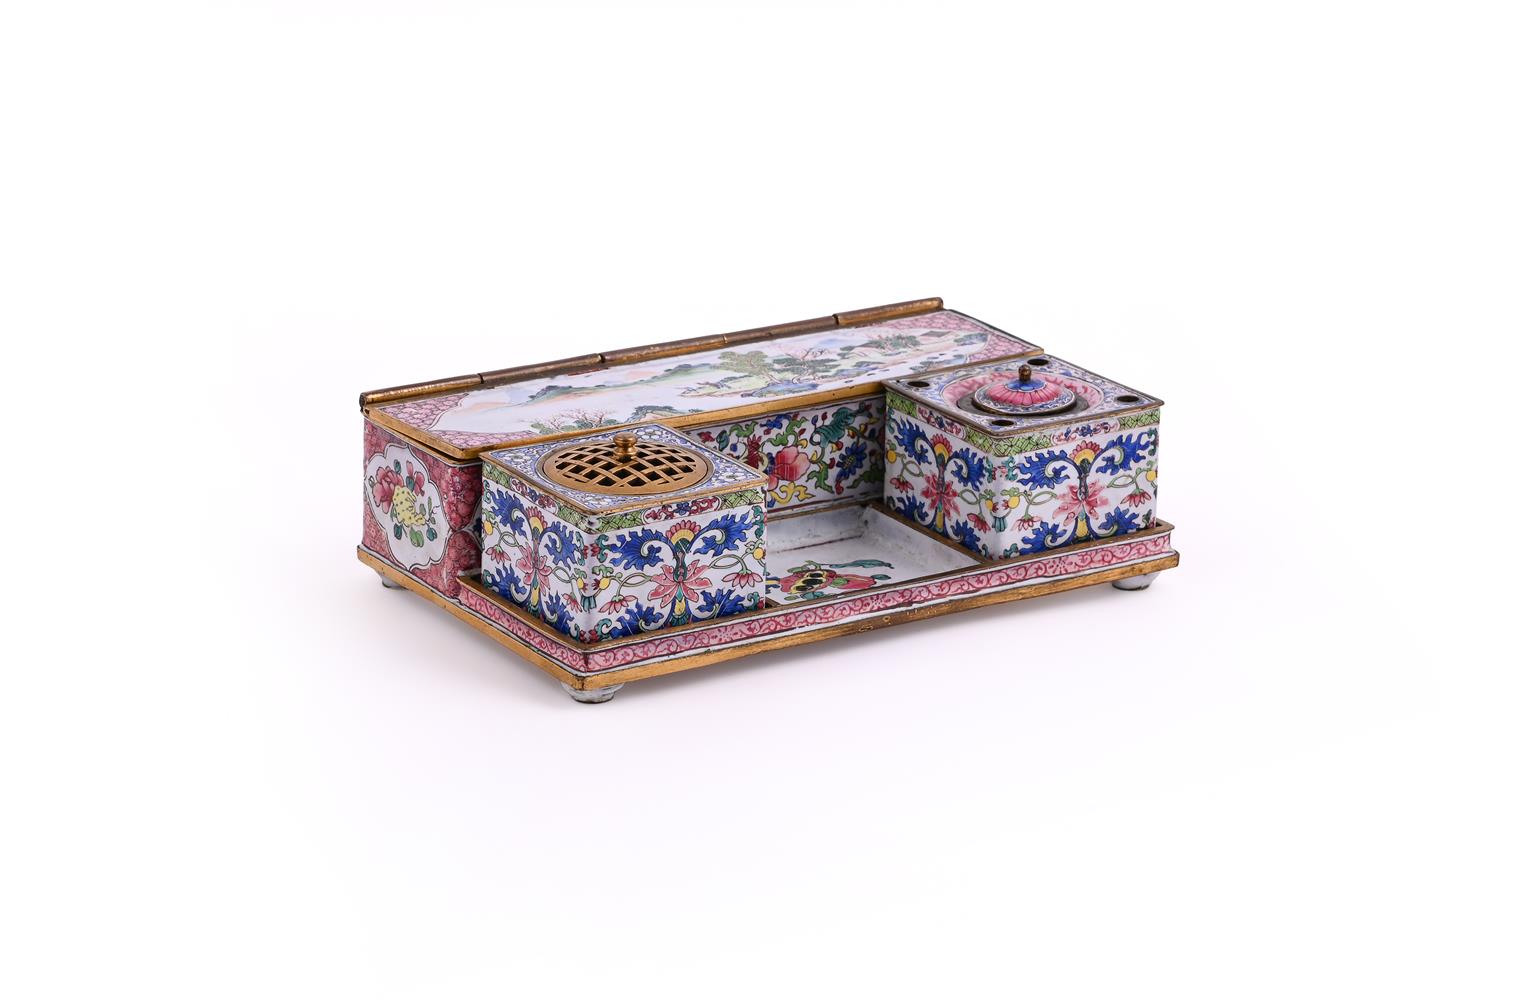 A rare Cantonese enamel Inkstand - Image 2 of 5